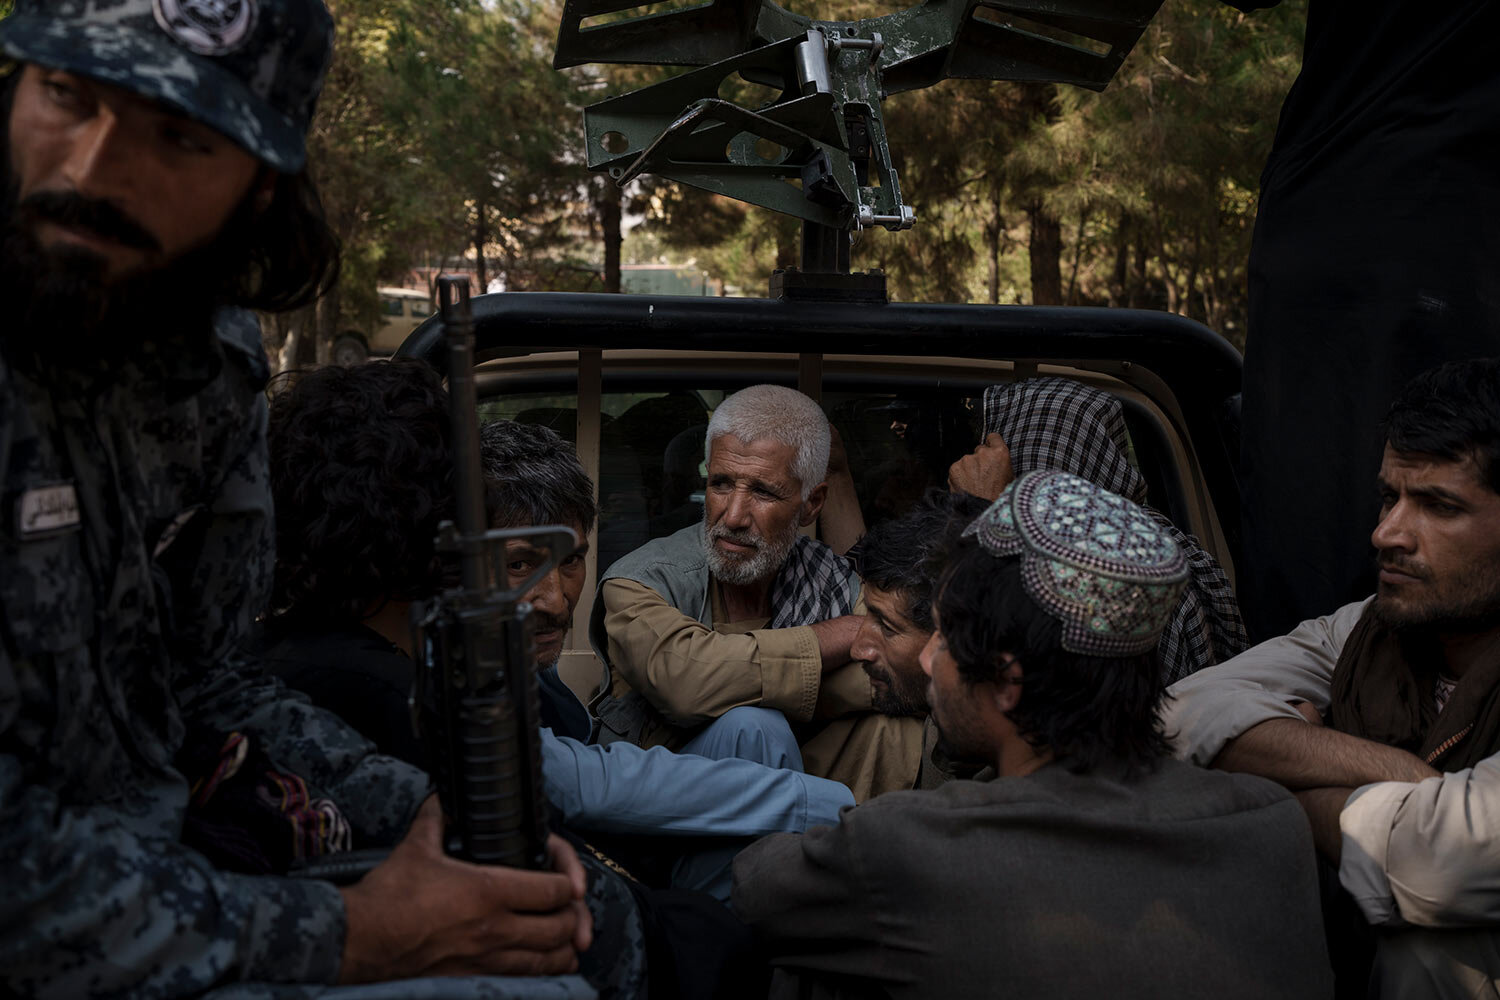  Afghan detainees sit in the back of a vehicle as they are transferred by Taliban police to a court in Kabul, Afghanistan, Sunday, Sept. 19, 2021. (AP Photo/Felipe Dana)  